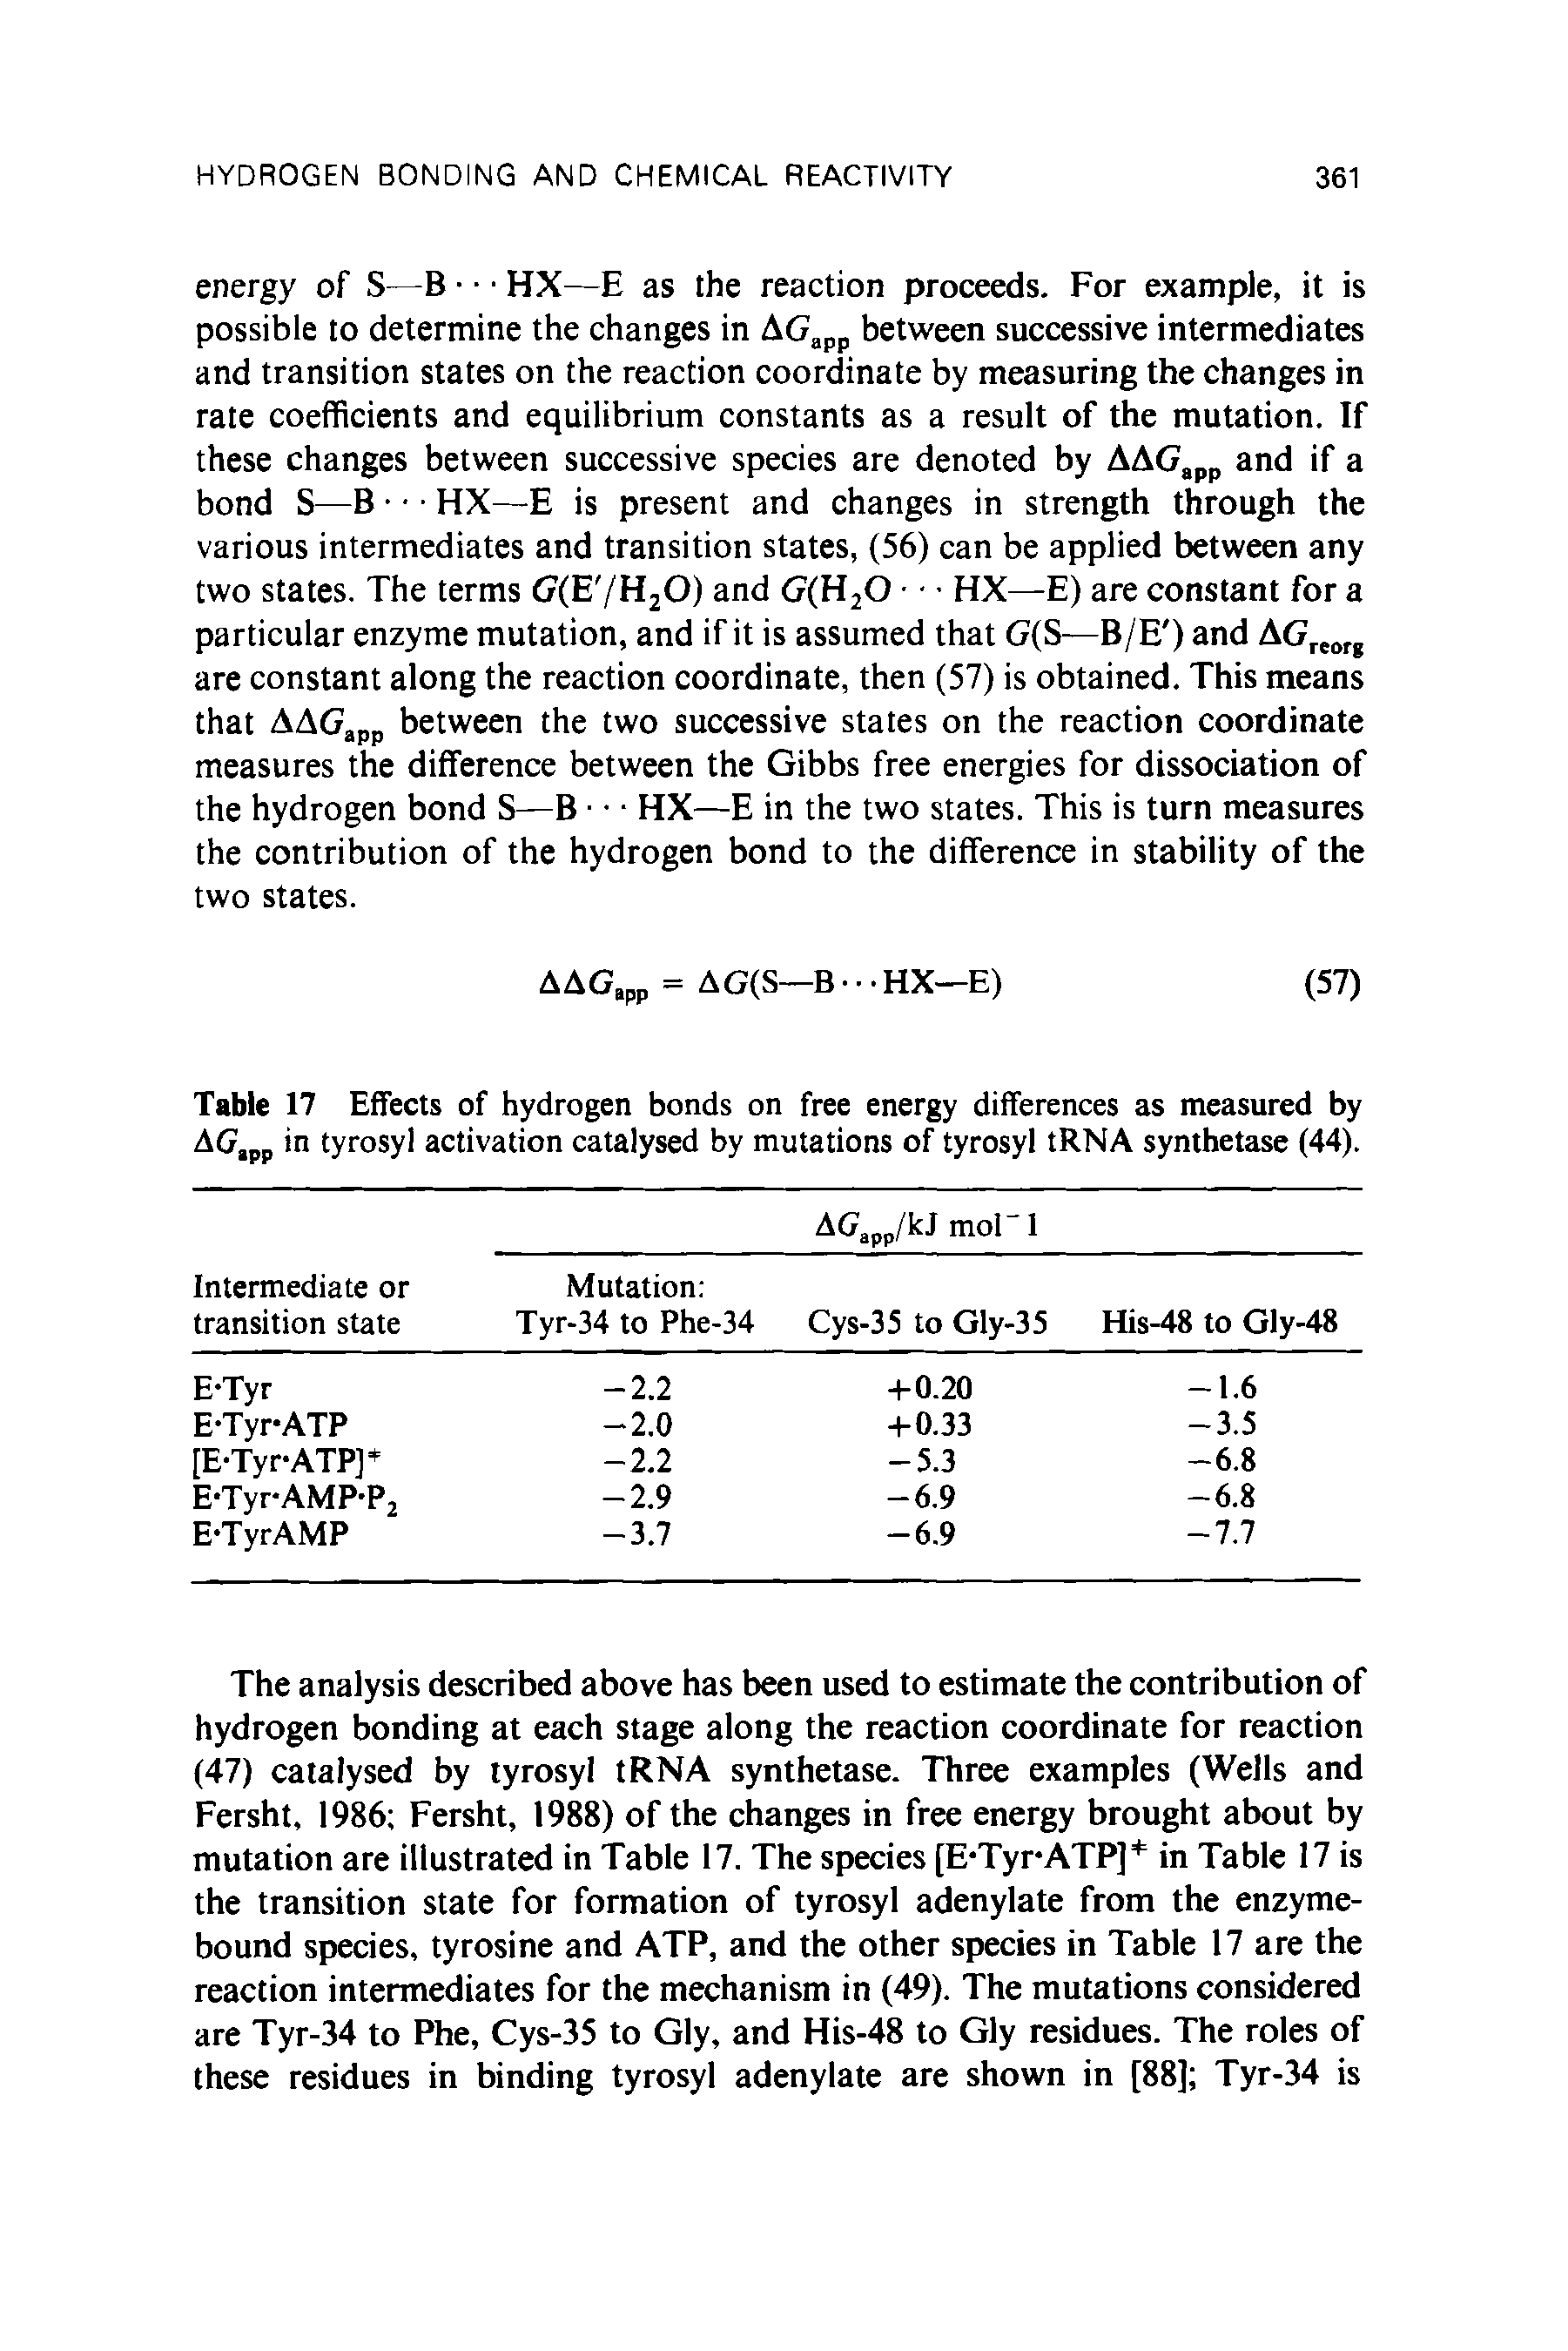 Table 17 Effects of hydrogen bonds on free energy differences as measured by AG.pp in tyrosyl activation catalysed by mutations of tyrosyl tRNA synthetase (44).